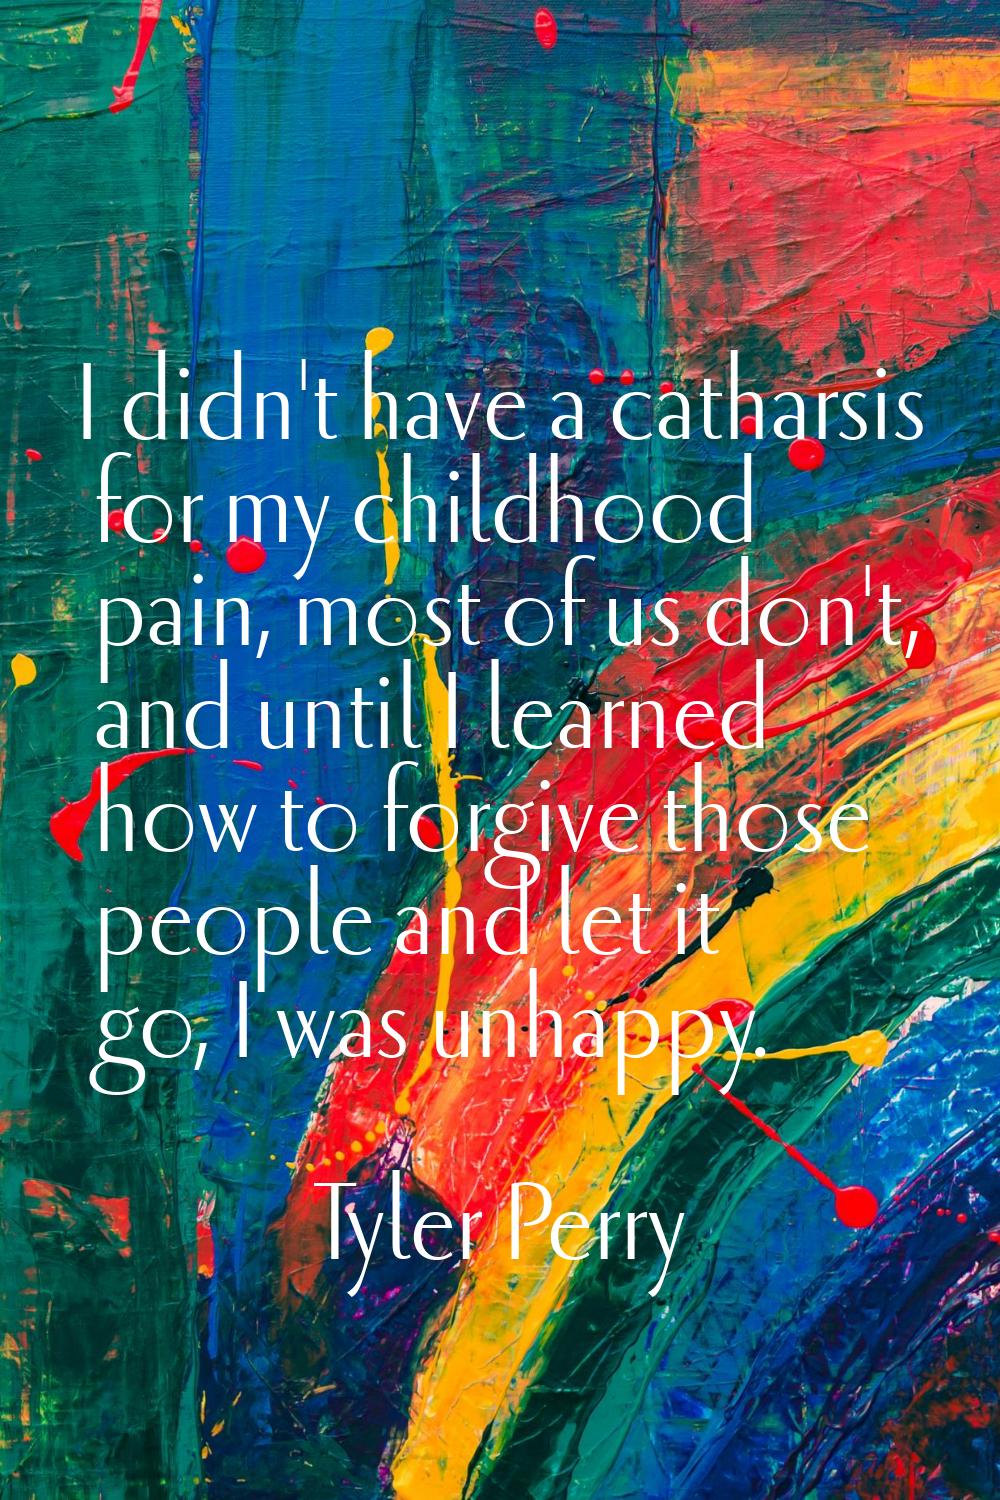 I didn't have a catharsis for my childhood pain, most of us don't, and until I learned how to forgi